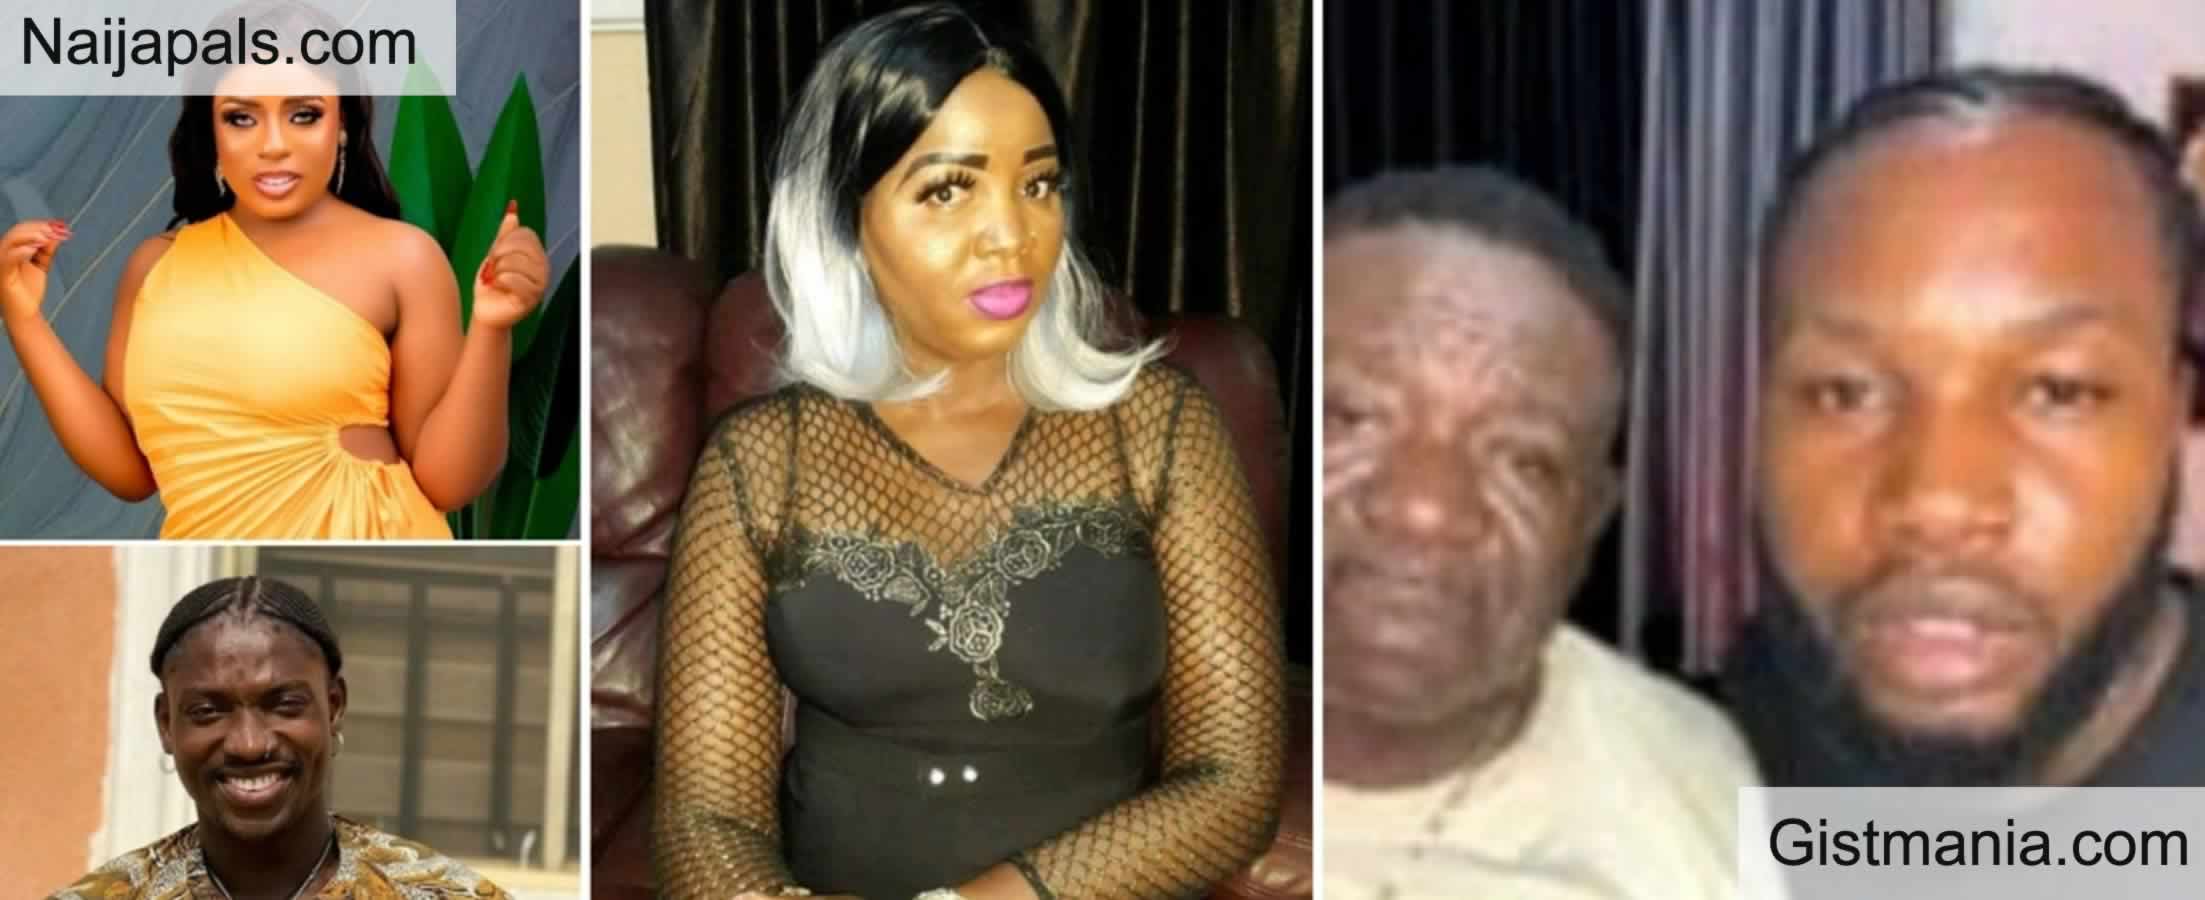 'My Stepson And Jasmine Are Planning To Flee To UK As Couple' – Mr Ibu’s Wife Claims